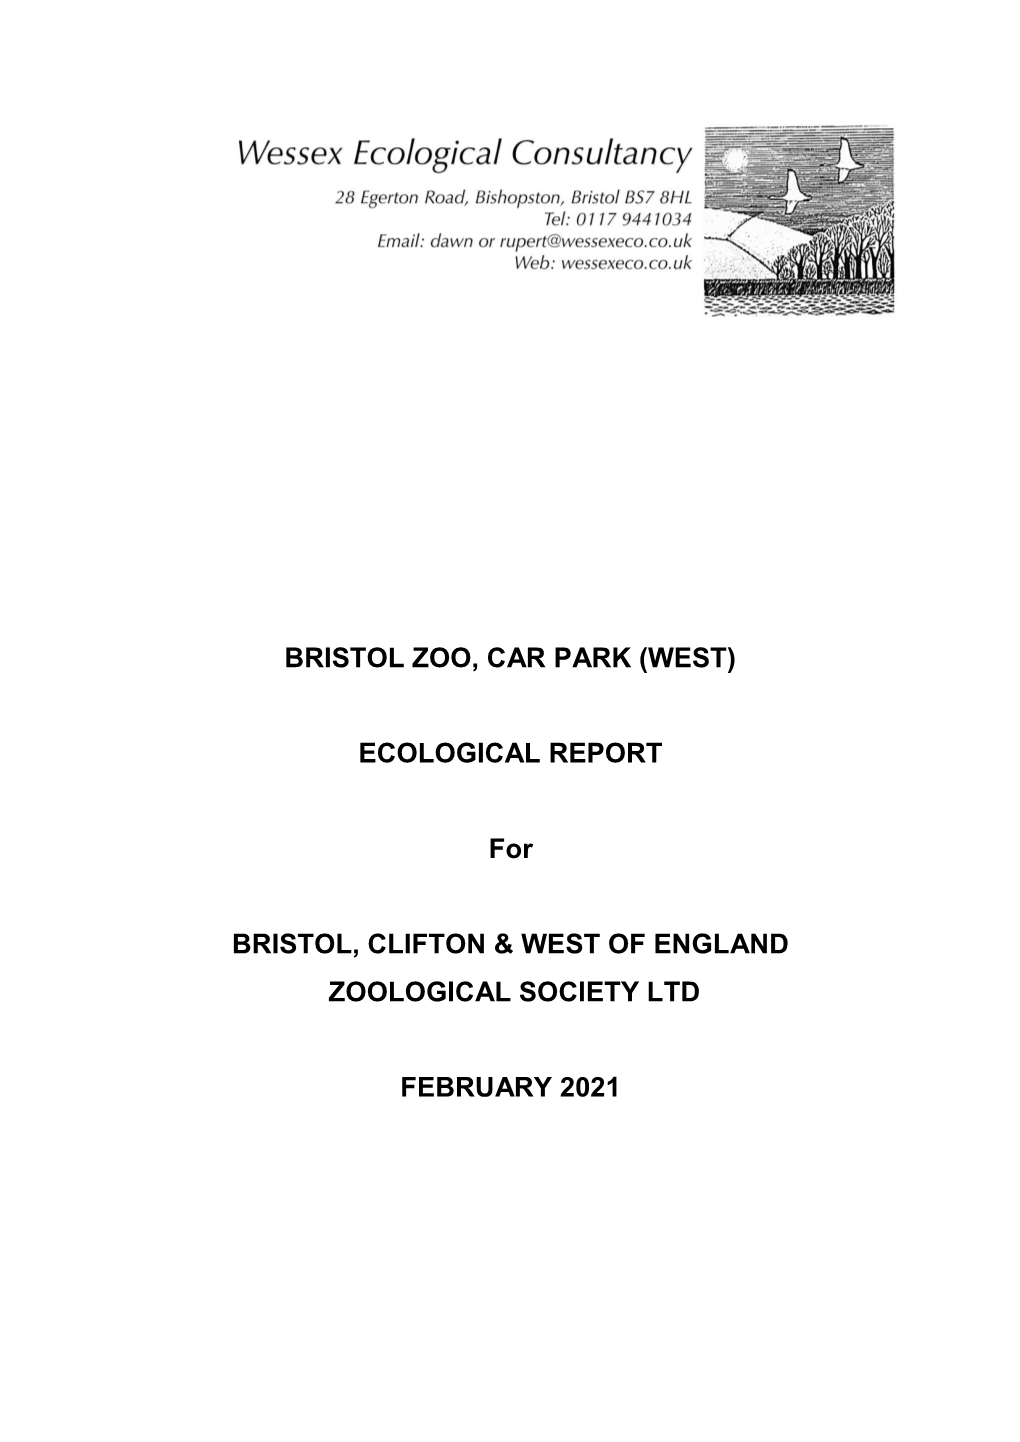 BRISTOL ZOO, CAR PARK (WEST) ECOLOGICAL REPORT For